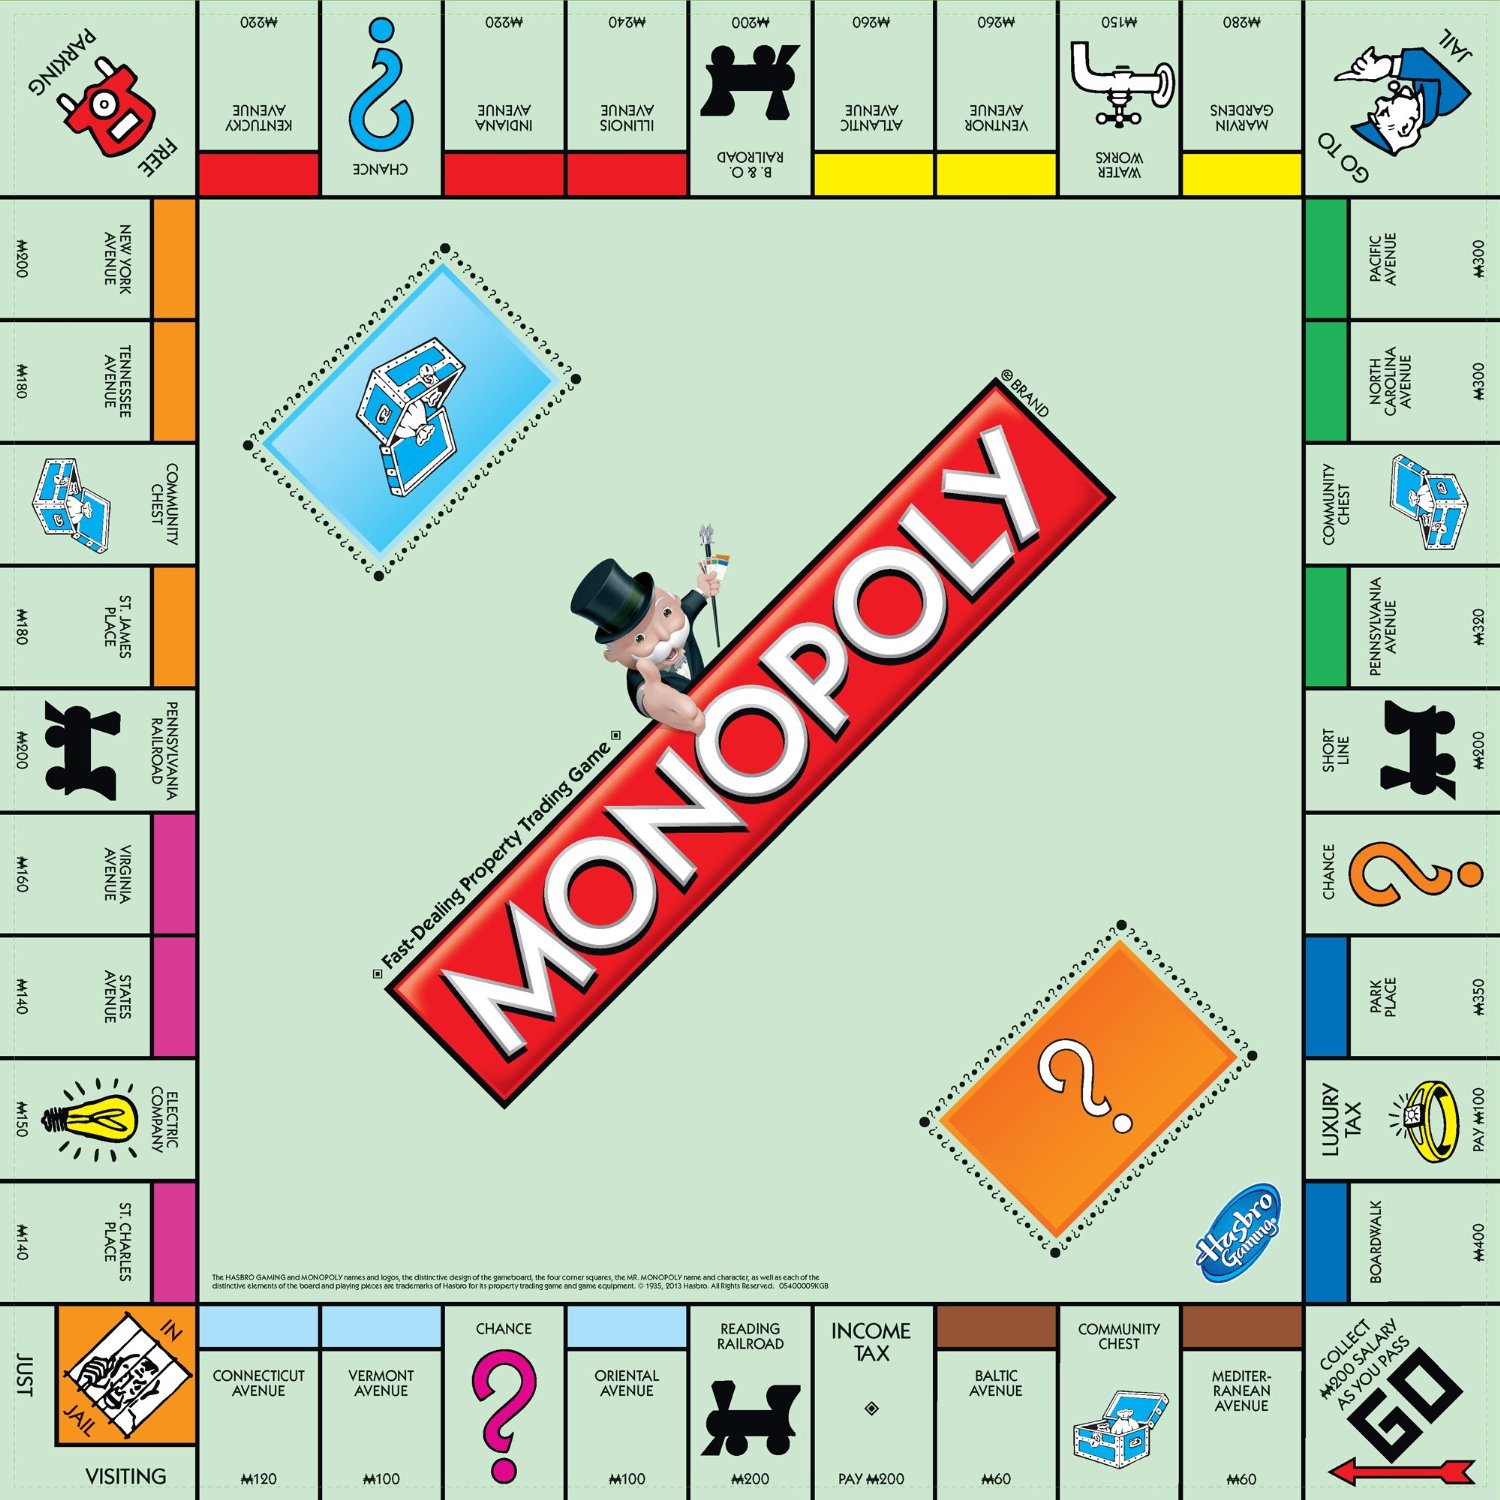 aveage game of monopoly meme